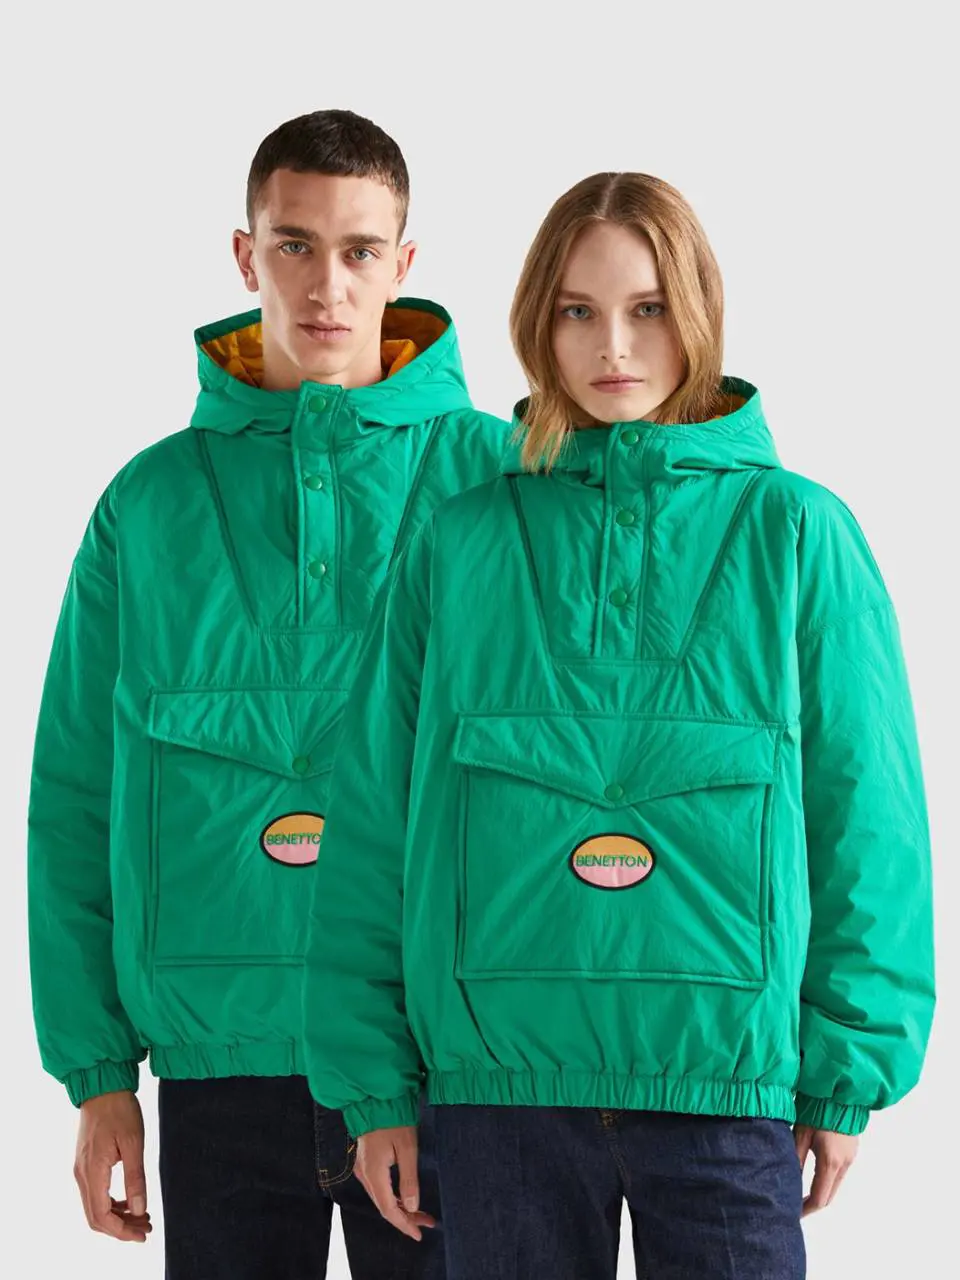 Benetton green jacket with pocket. 1